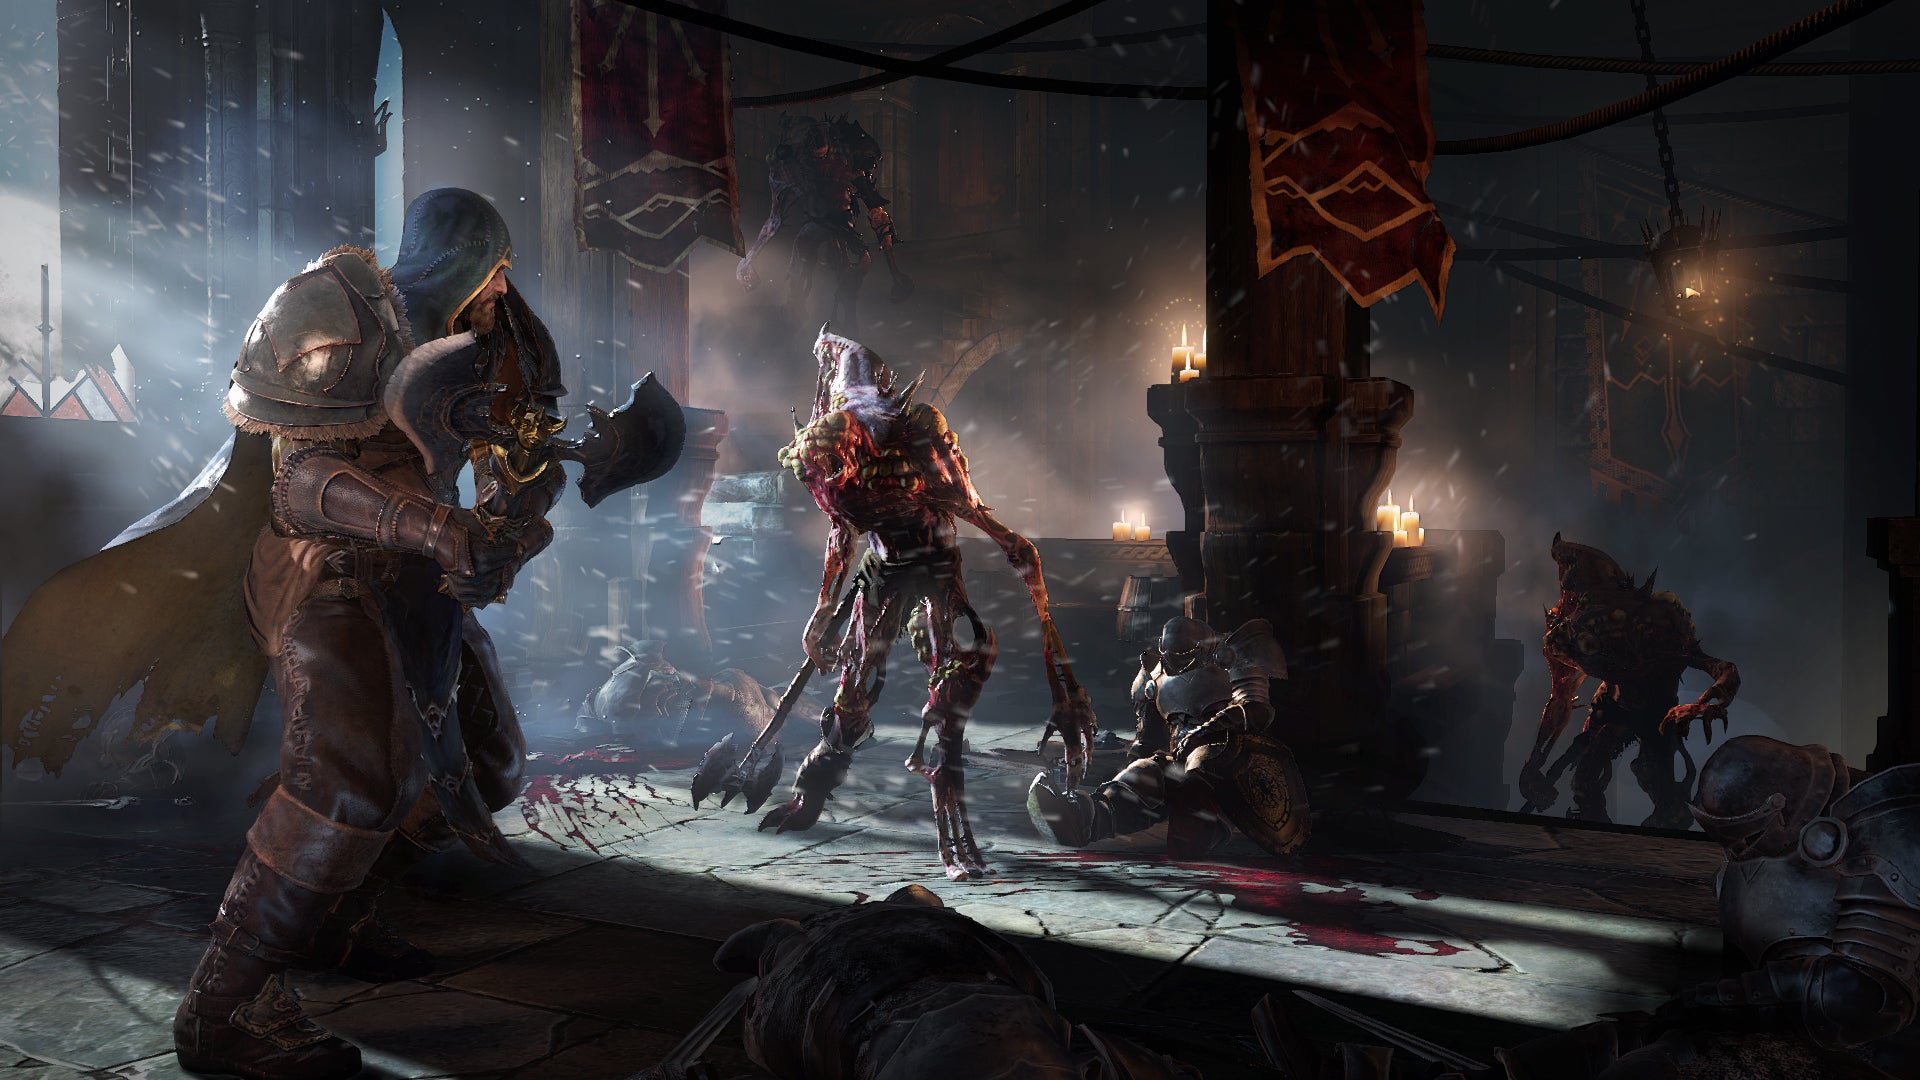 Lords of the Fallen Players' Reviews - TapTap